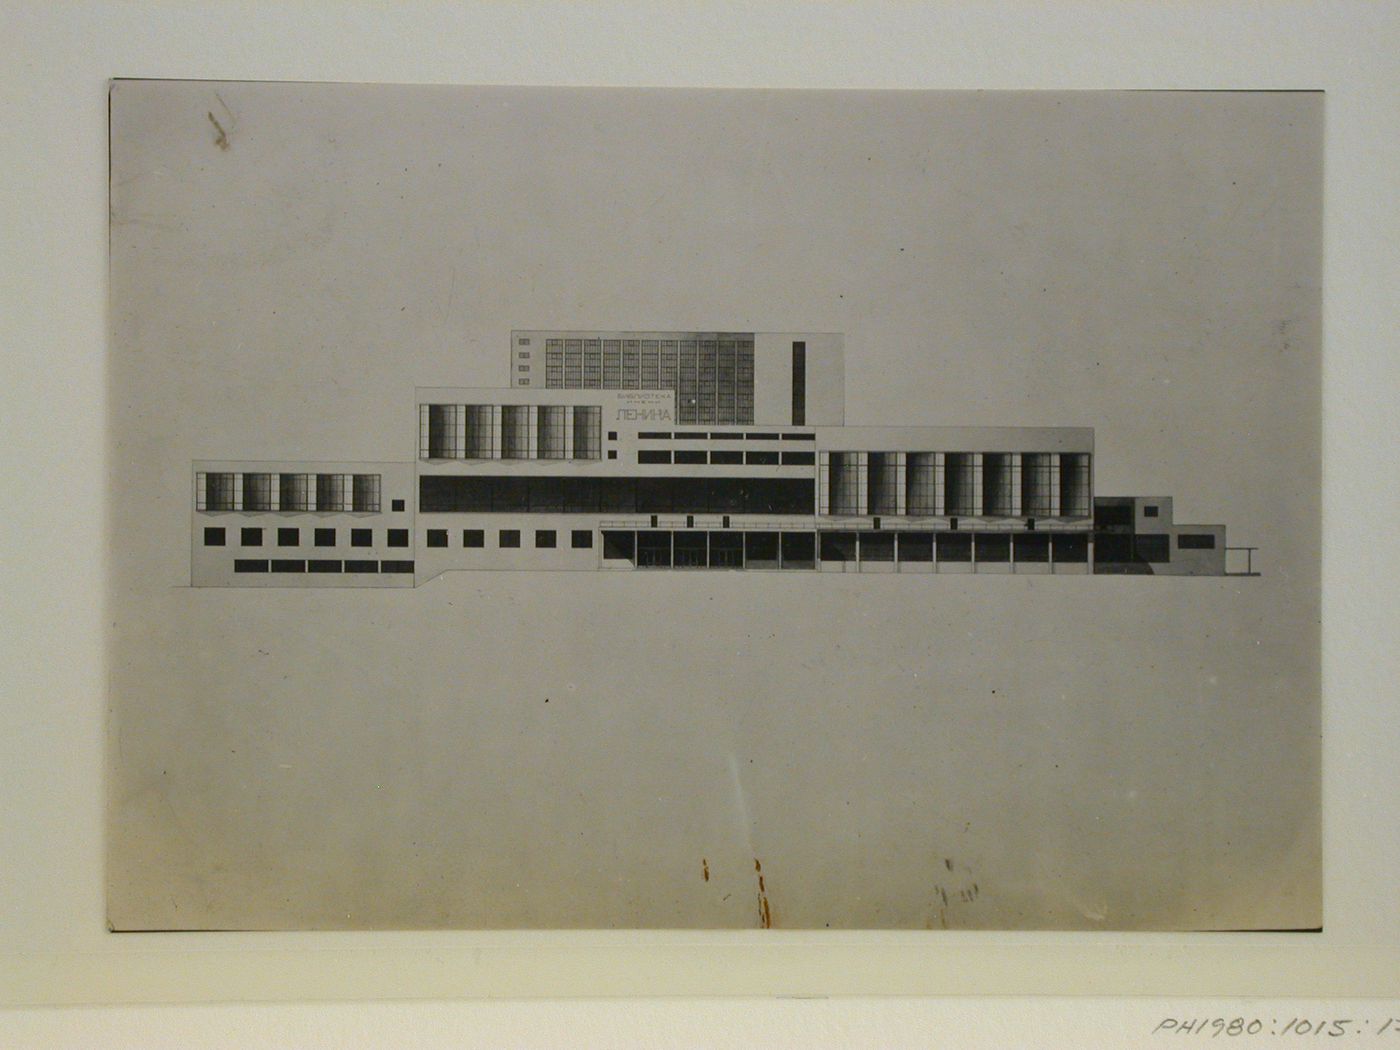 View of an elevation drawing for a library, U.S.S.R. (now Russia)